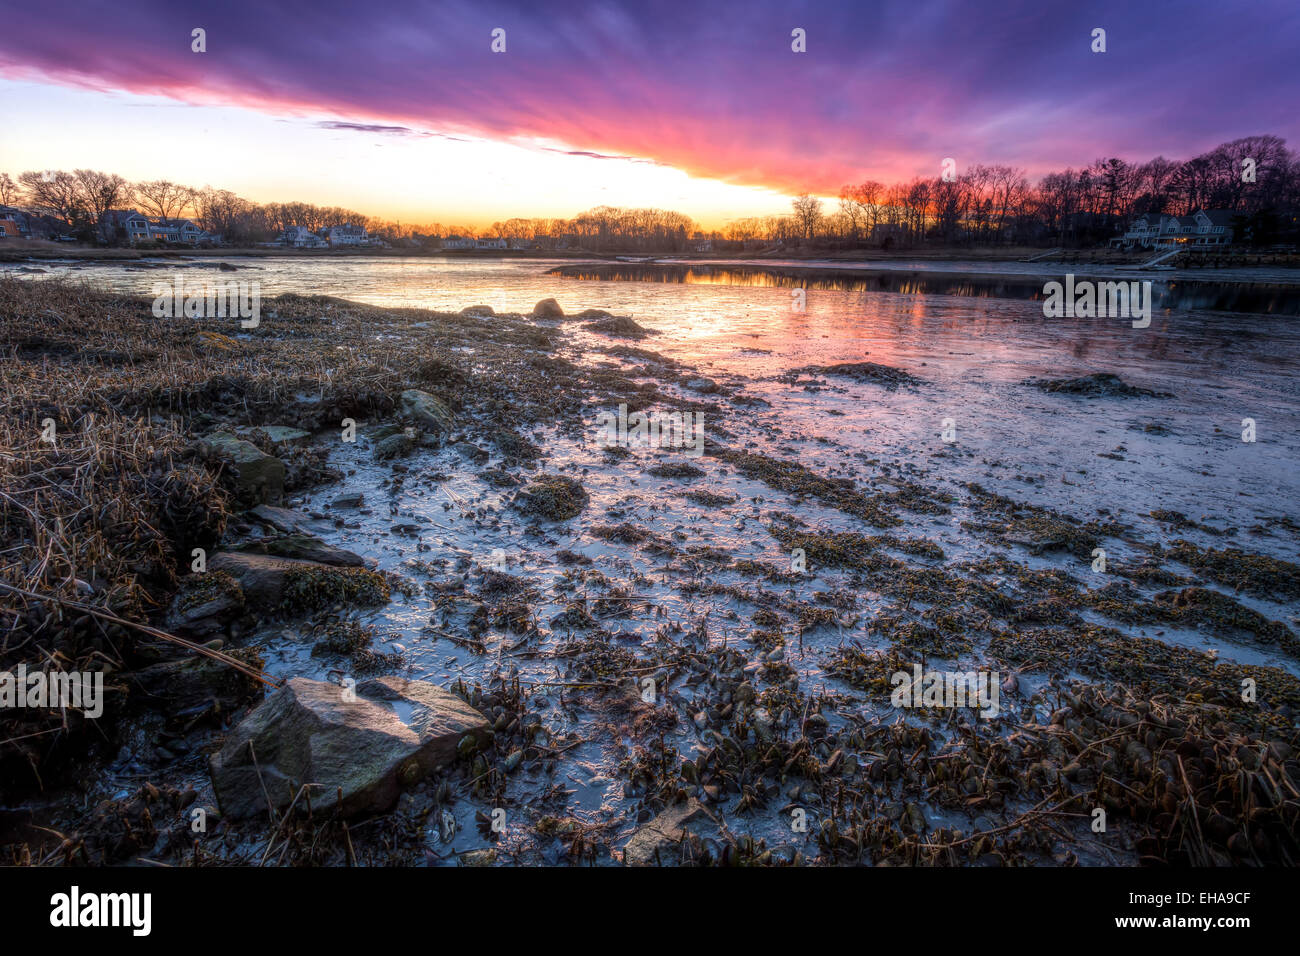 A color pink and purple sunset over a muddy waters at low tide. Stock Photo